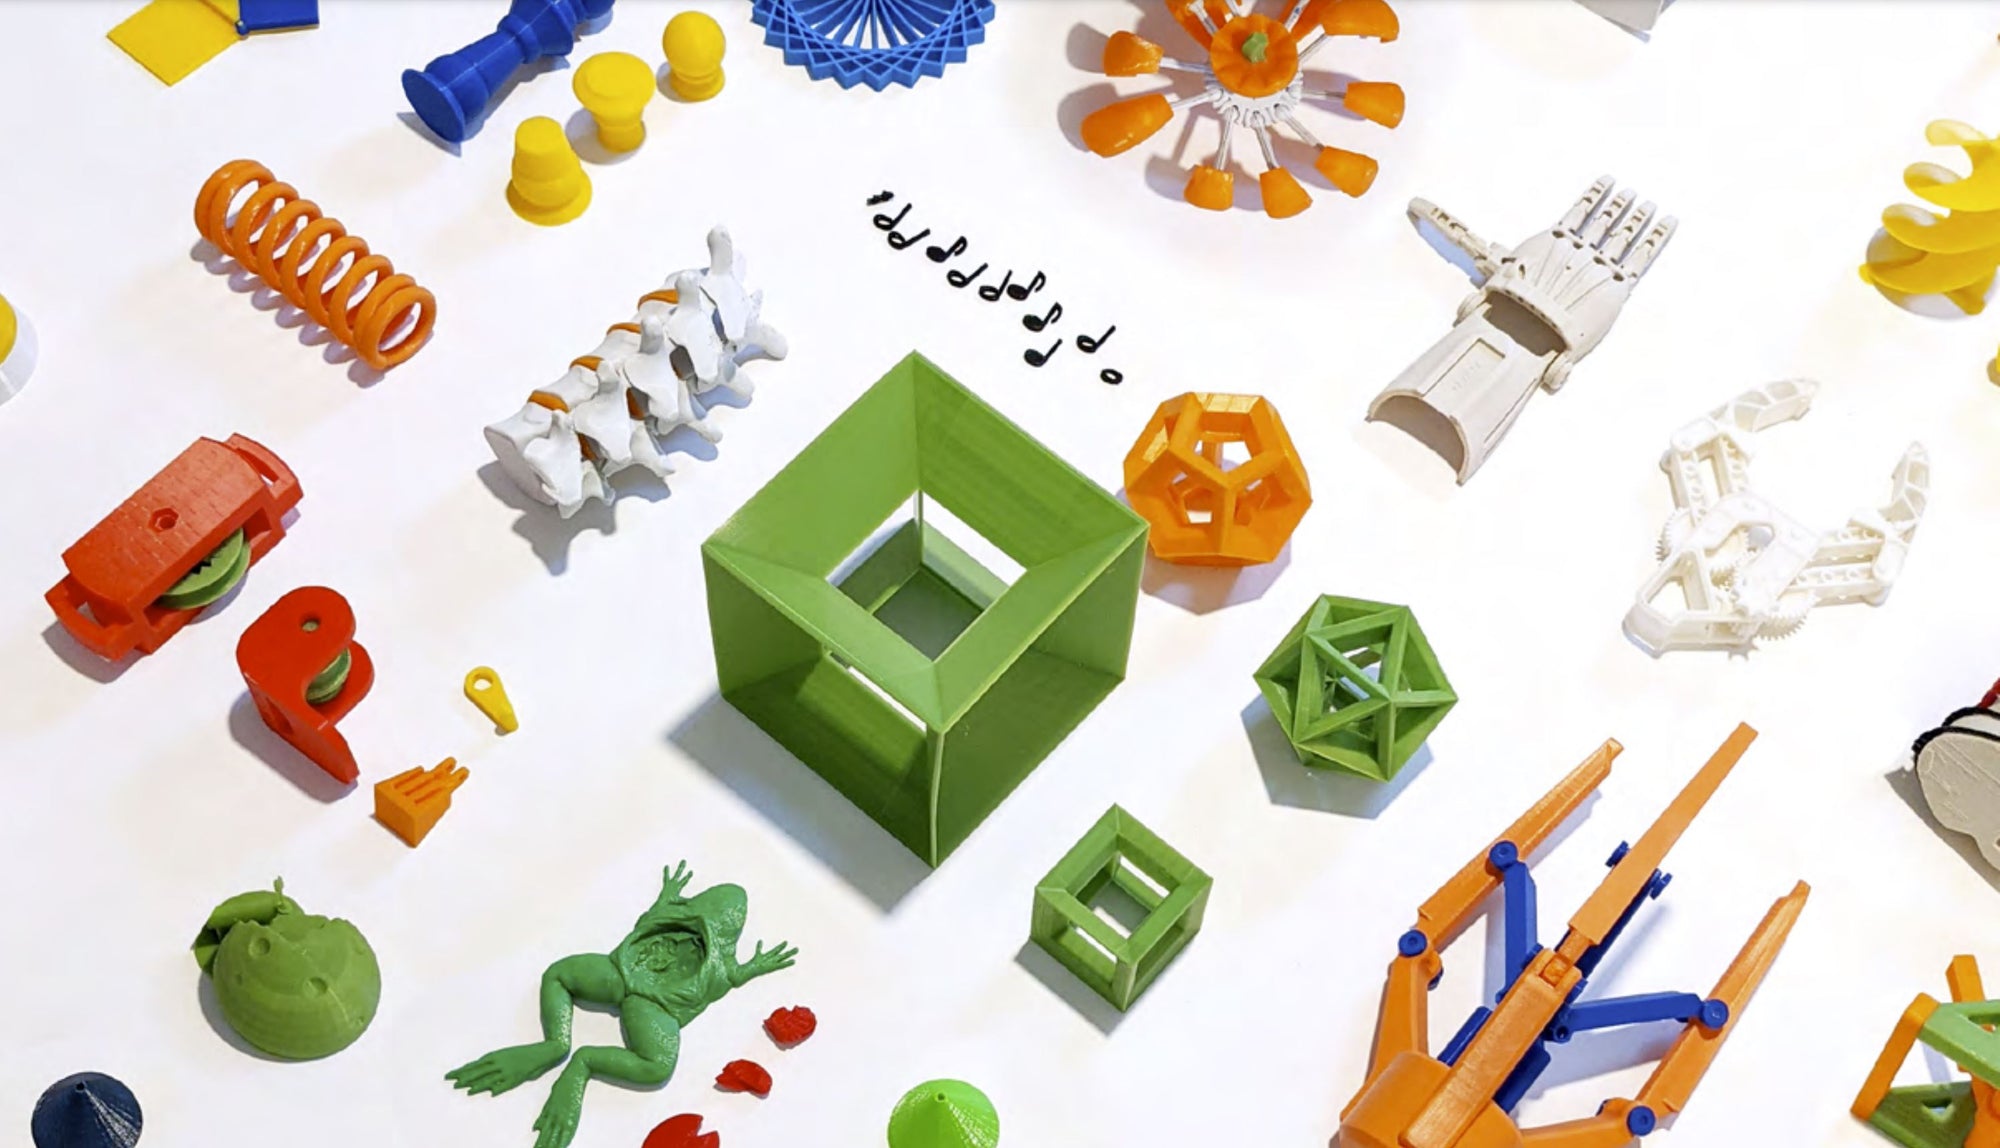 Gear Up for a Year of Innovation: Why Educators Should Stock Up on 3D Printing Materials Now